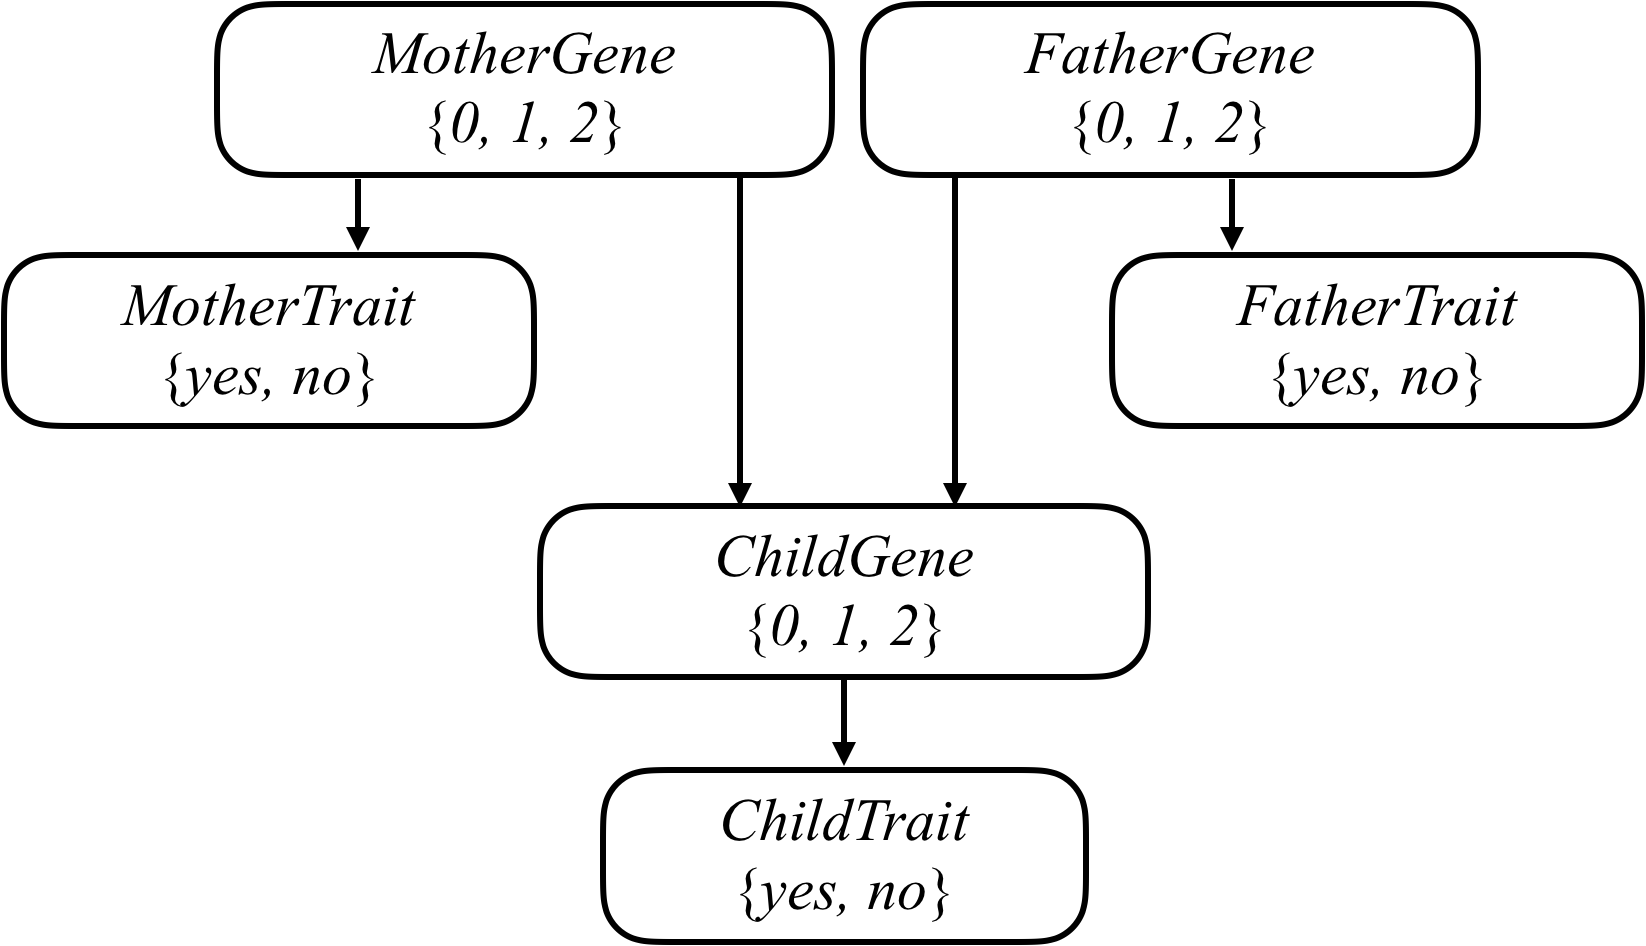 Bayesian Network for genetic traits